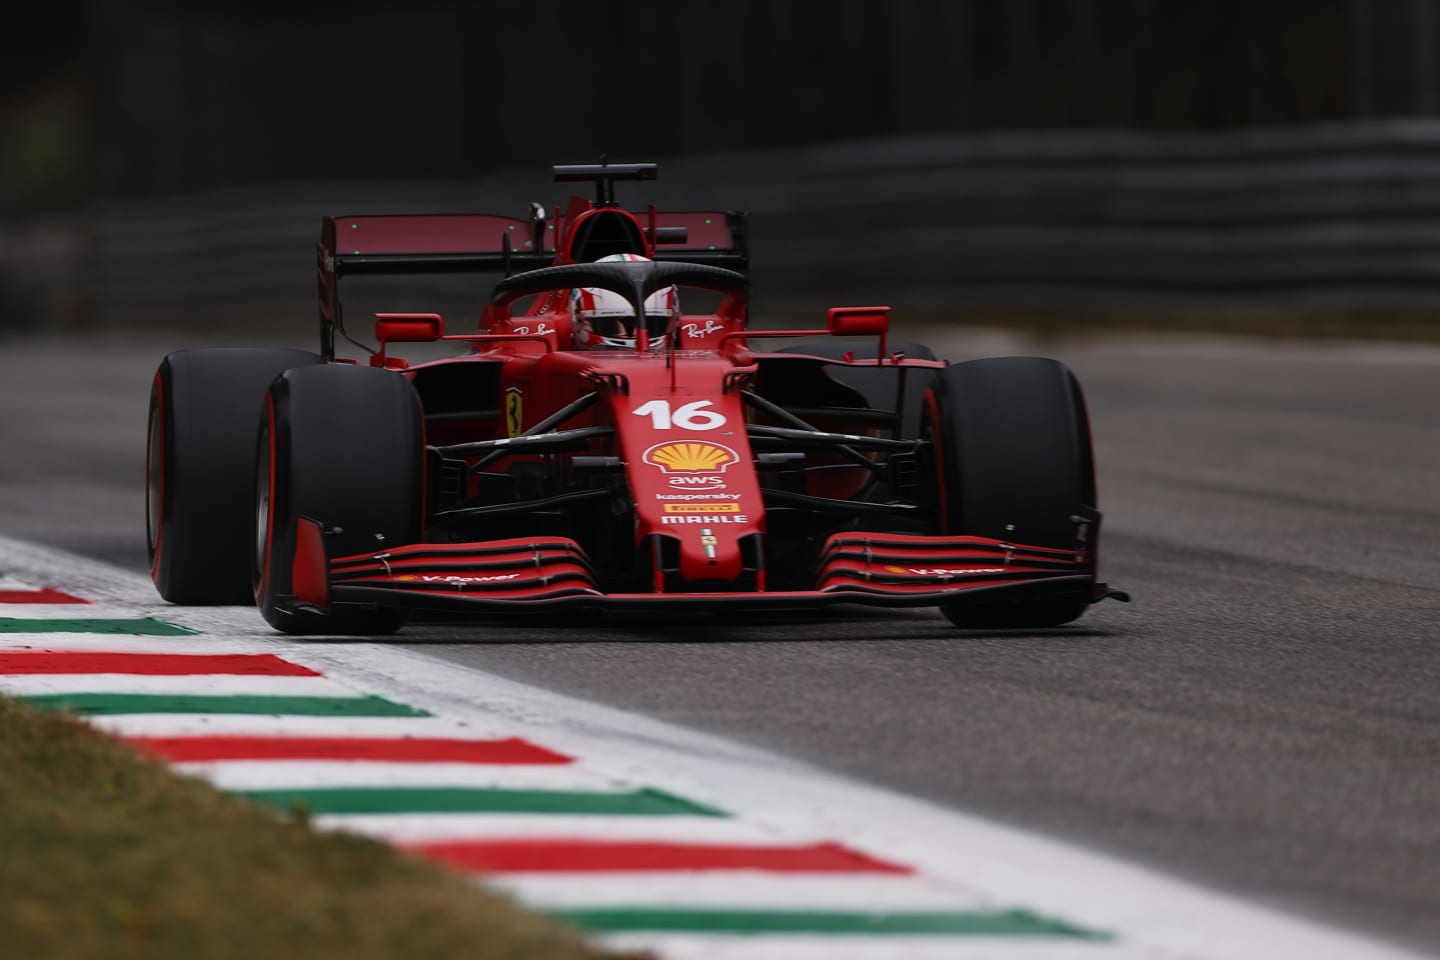 MONZA, ITALY - SEPTEMBER 10: Charles Leclerc of Monaco driving the (16) Scuderia Ferrari SF21 during qualifying ahead of the F1 Grand Prix of Italy at Autodromo di Monza on September 10, 2021 in Monza, Italy. (Photo by Lars Baron/Getty Images)